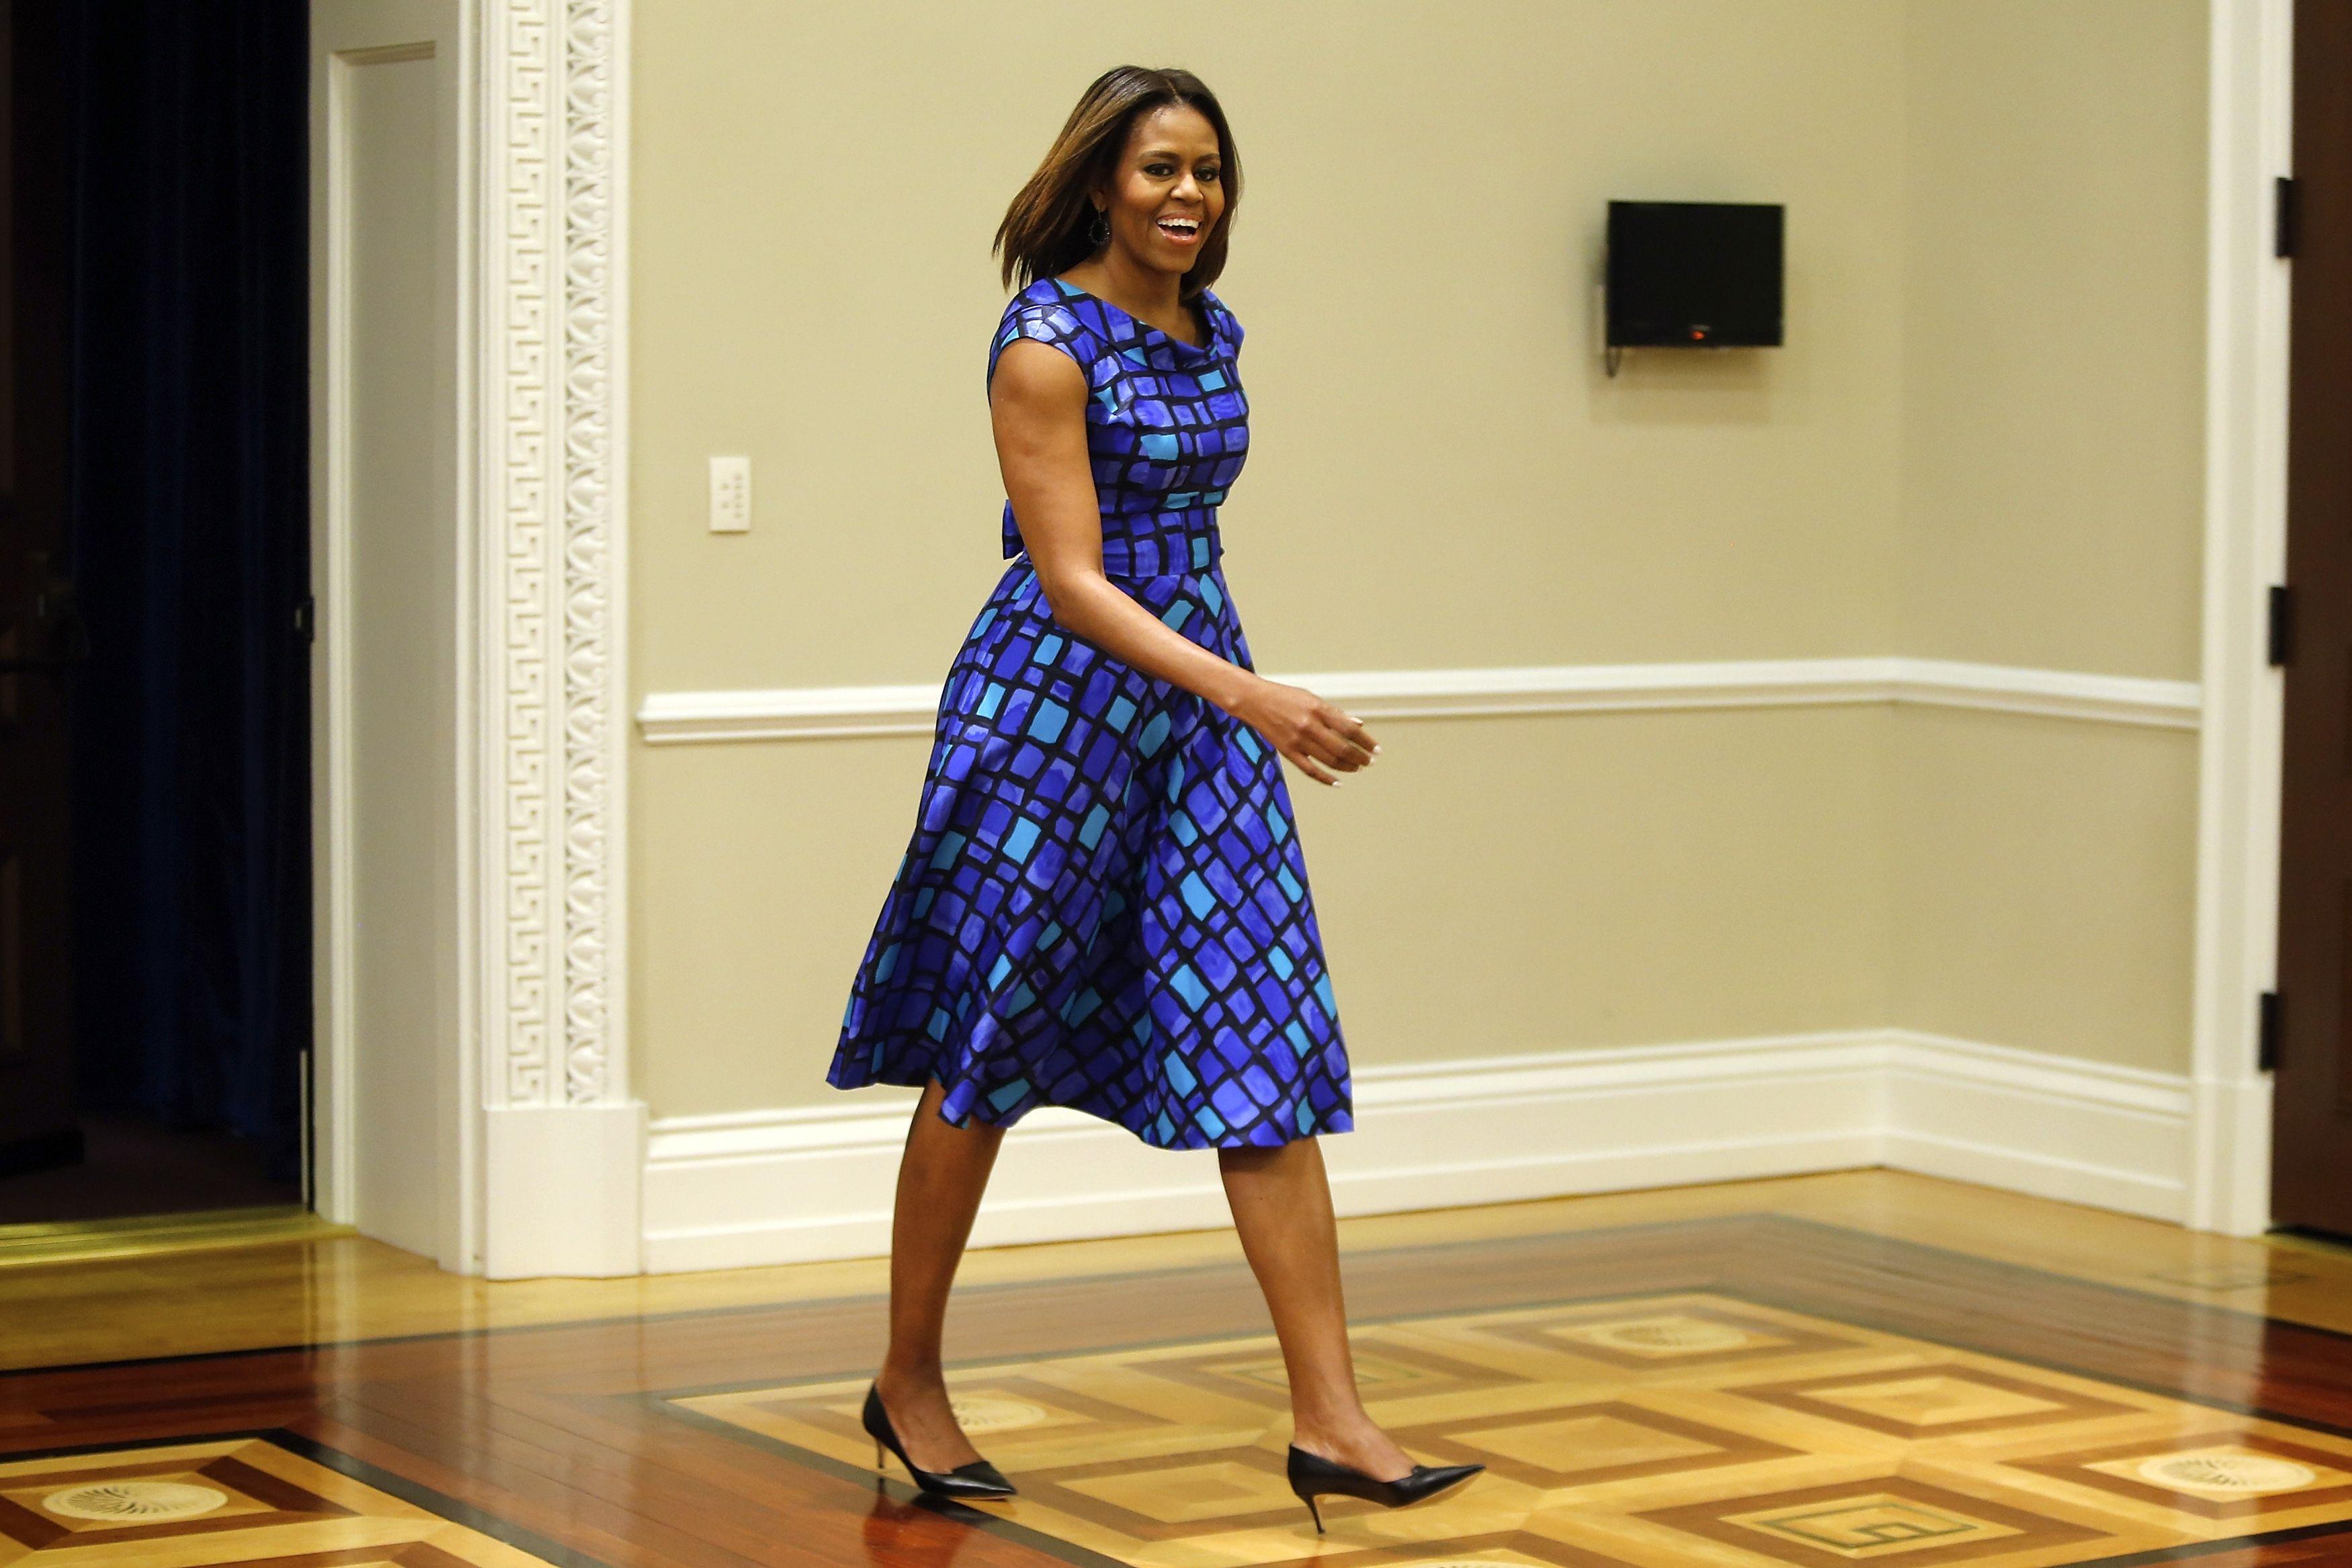 Is Michelle running for the Senate?